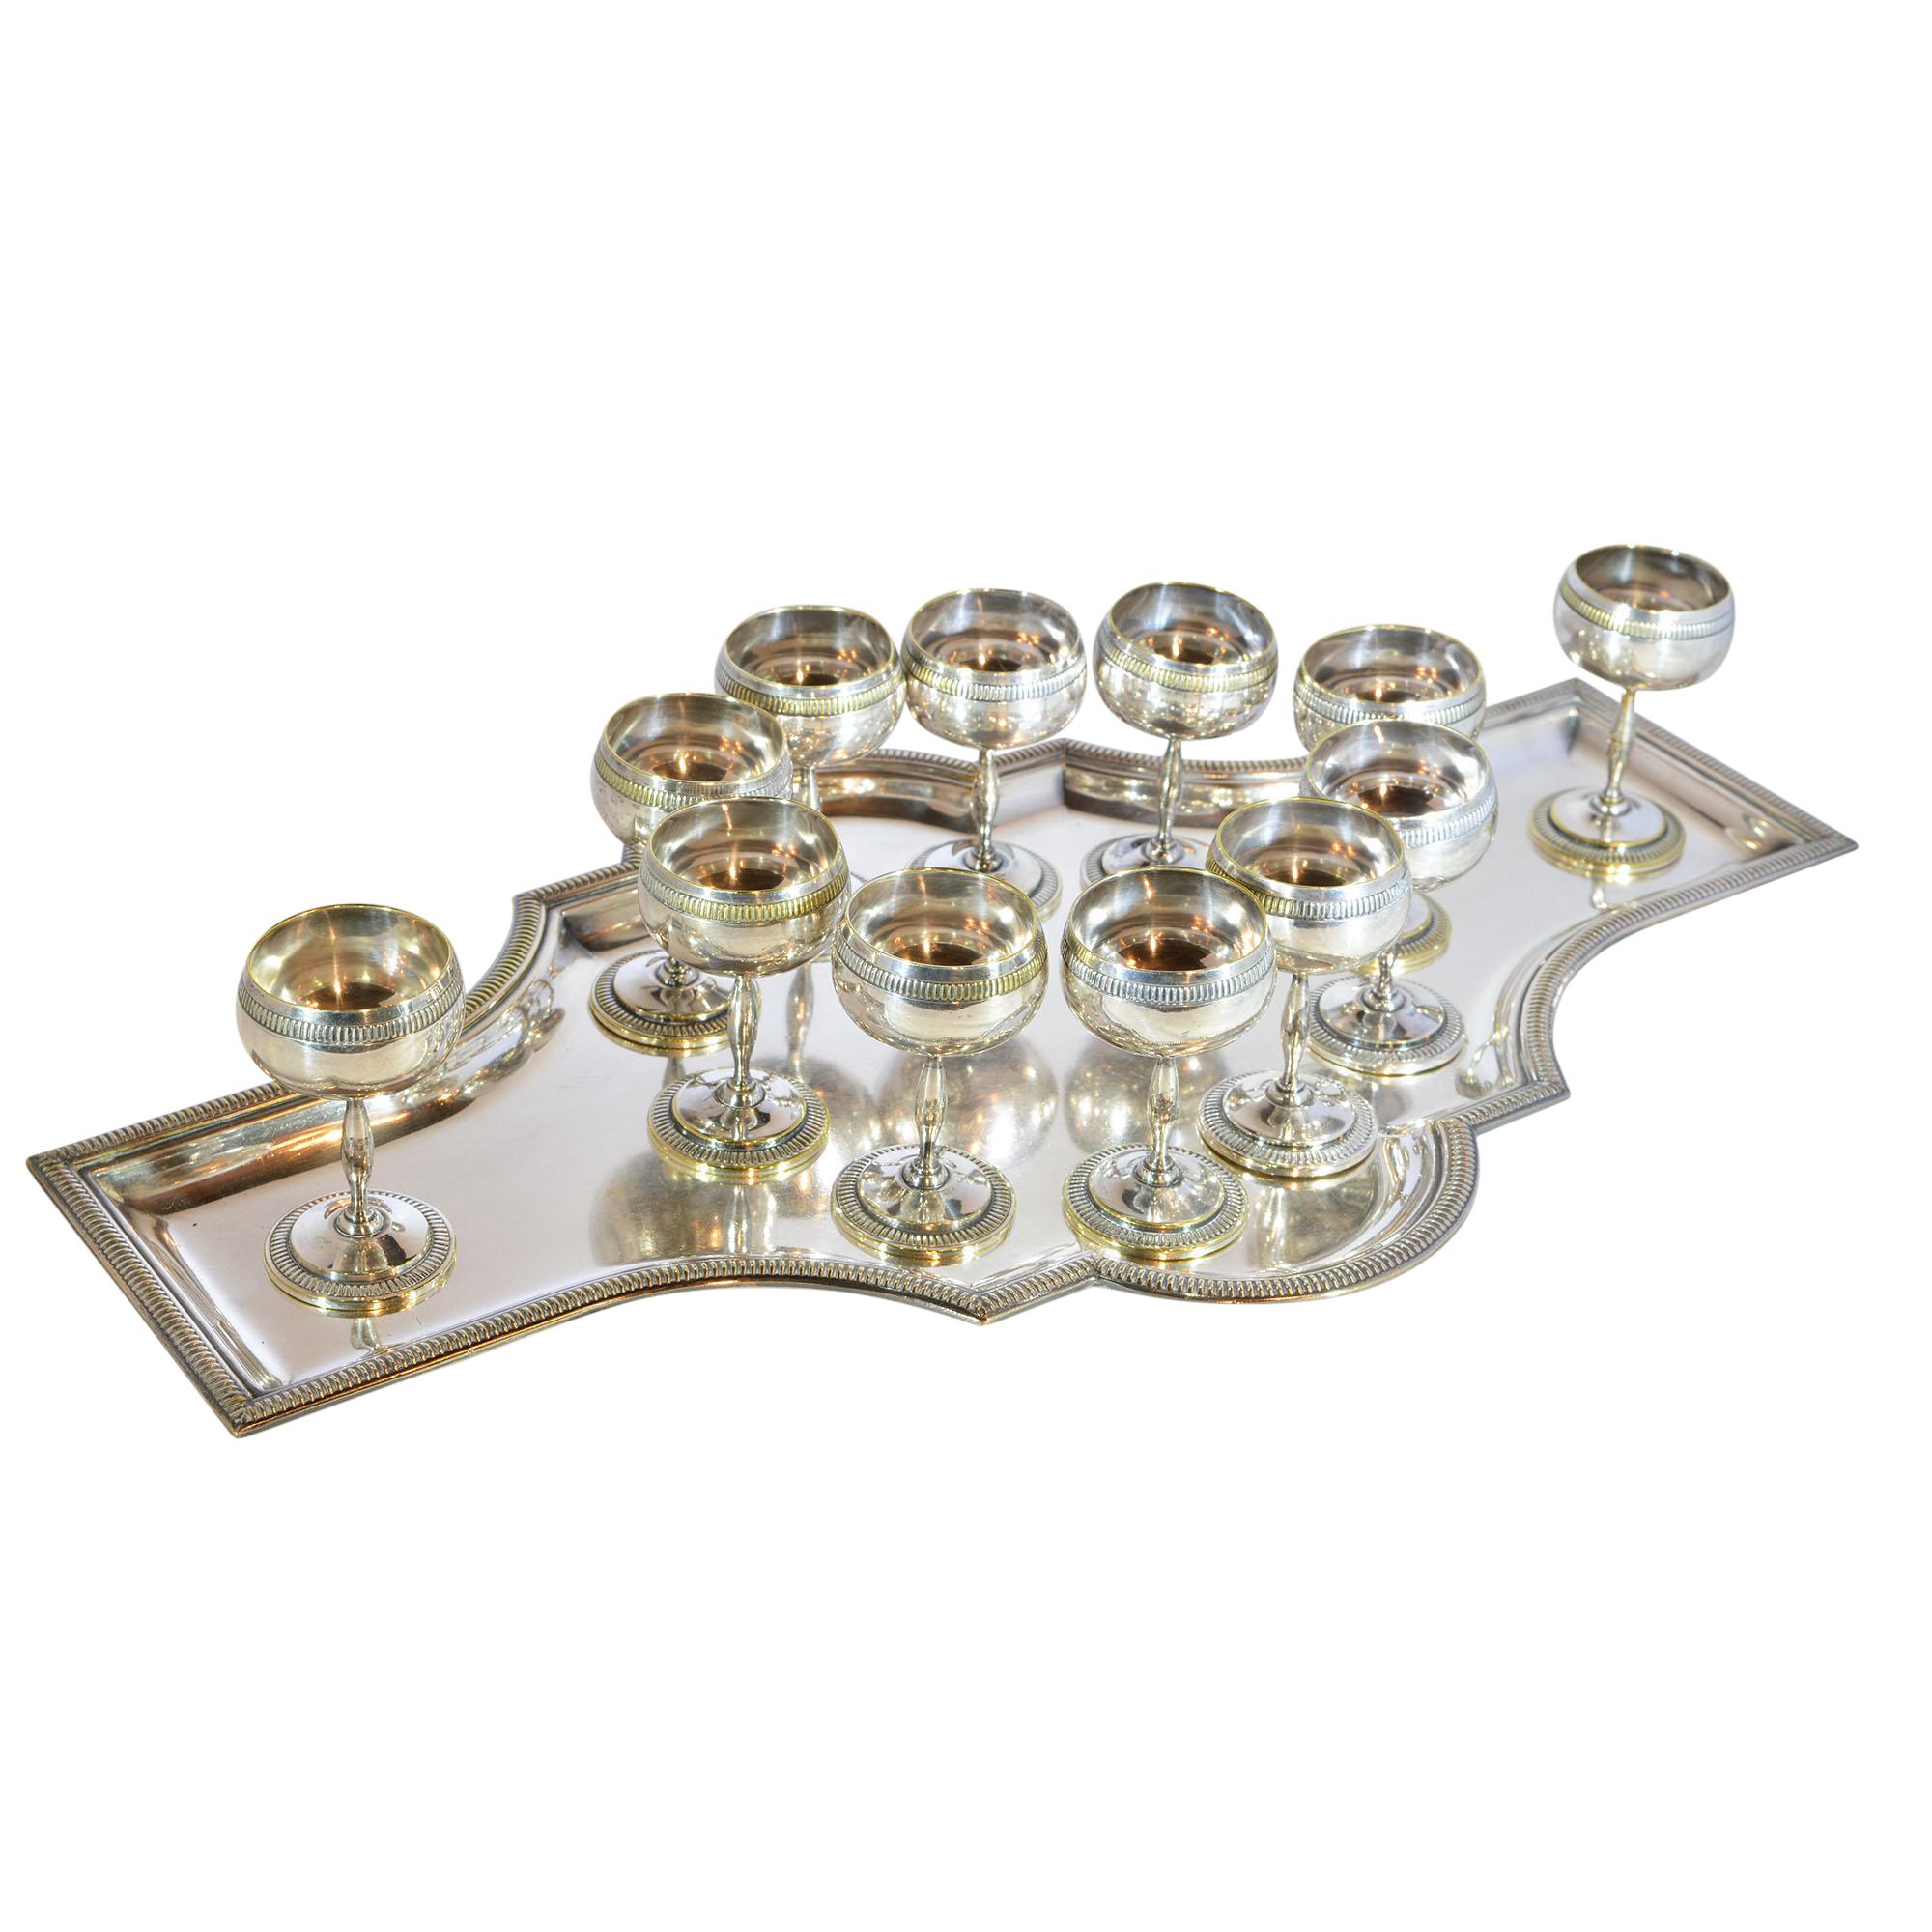 Silver Plate Shot Glass Set with Tray 1